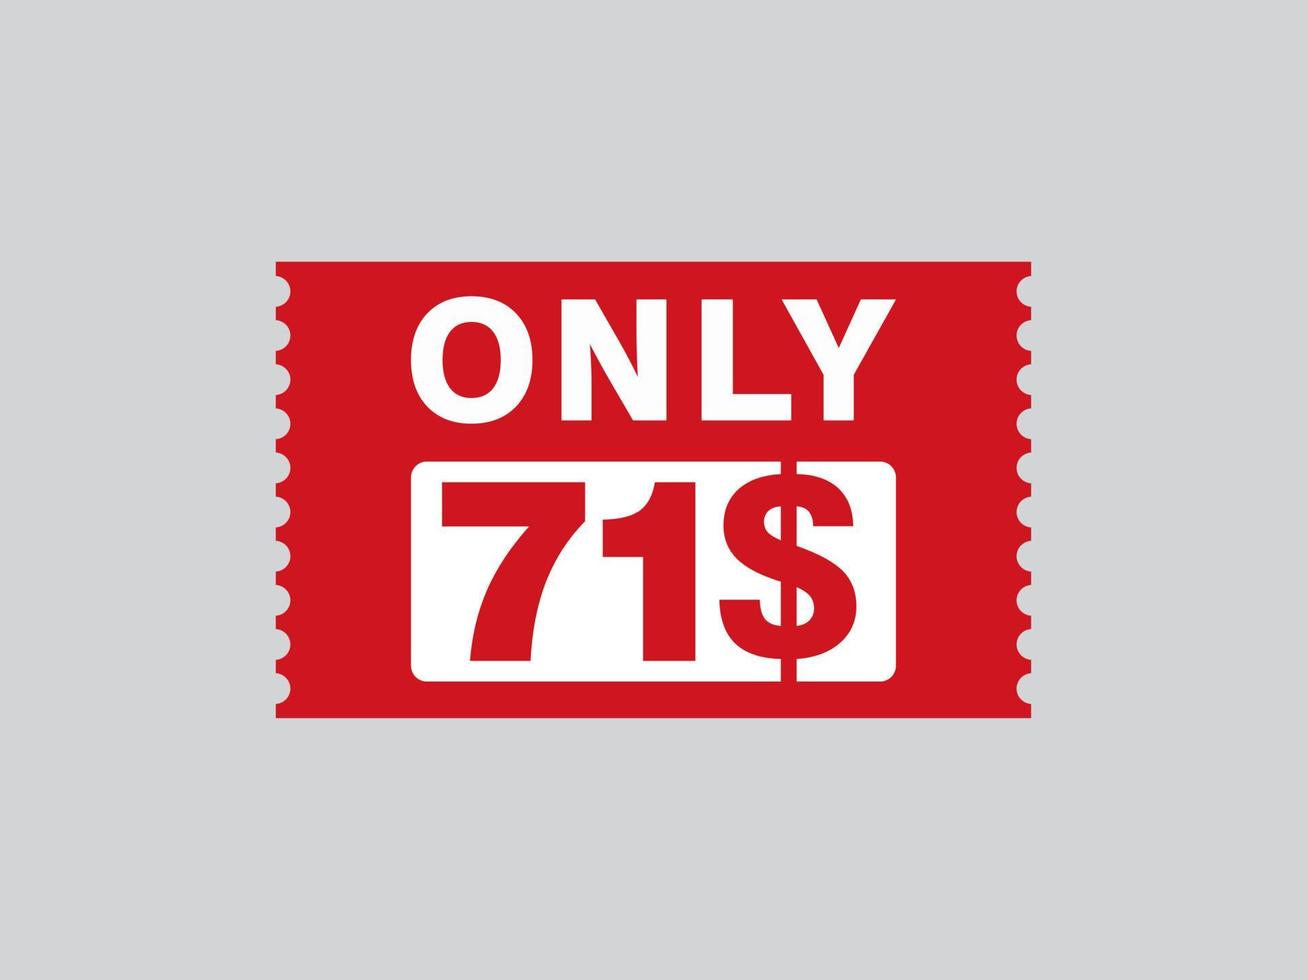 71 Dollar Only Coupon sign or Label or discount voucher Money Saving label, with coupon vector illustration summer offer ends weekend holiday